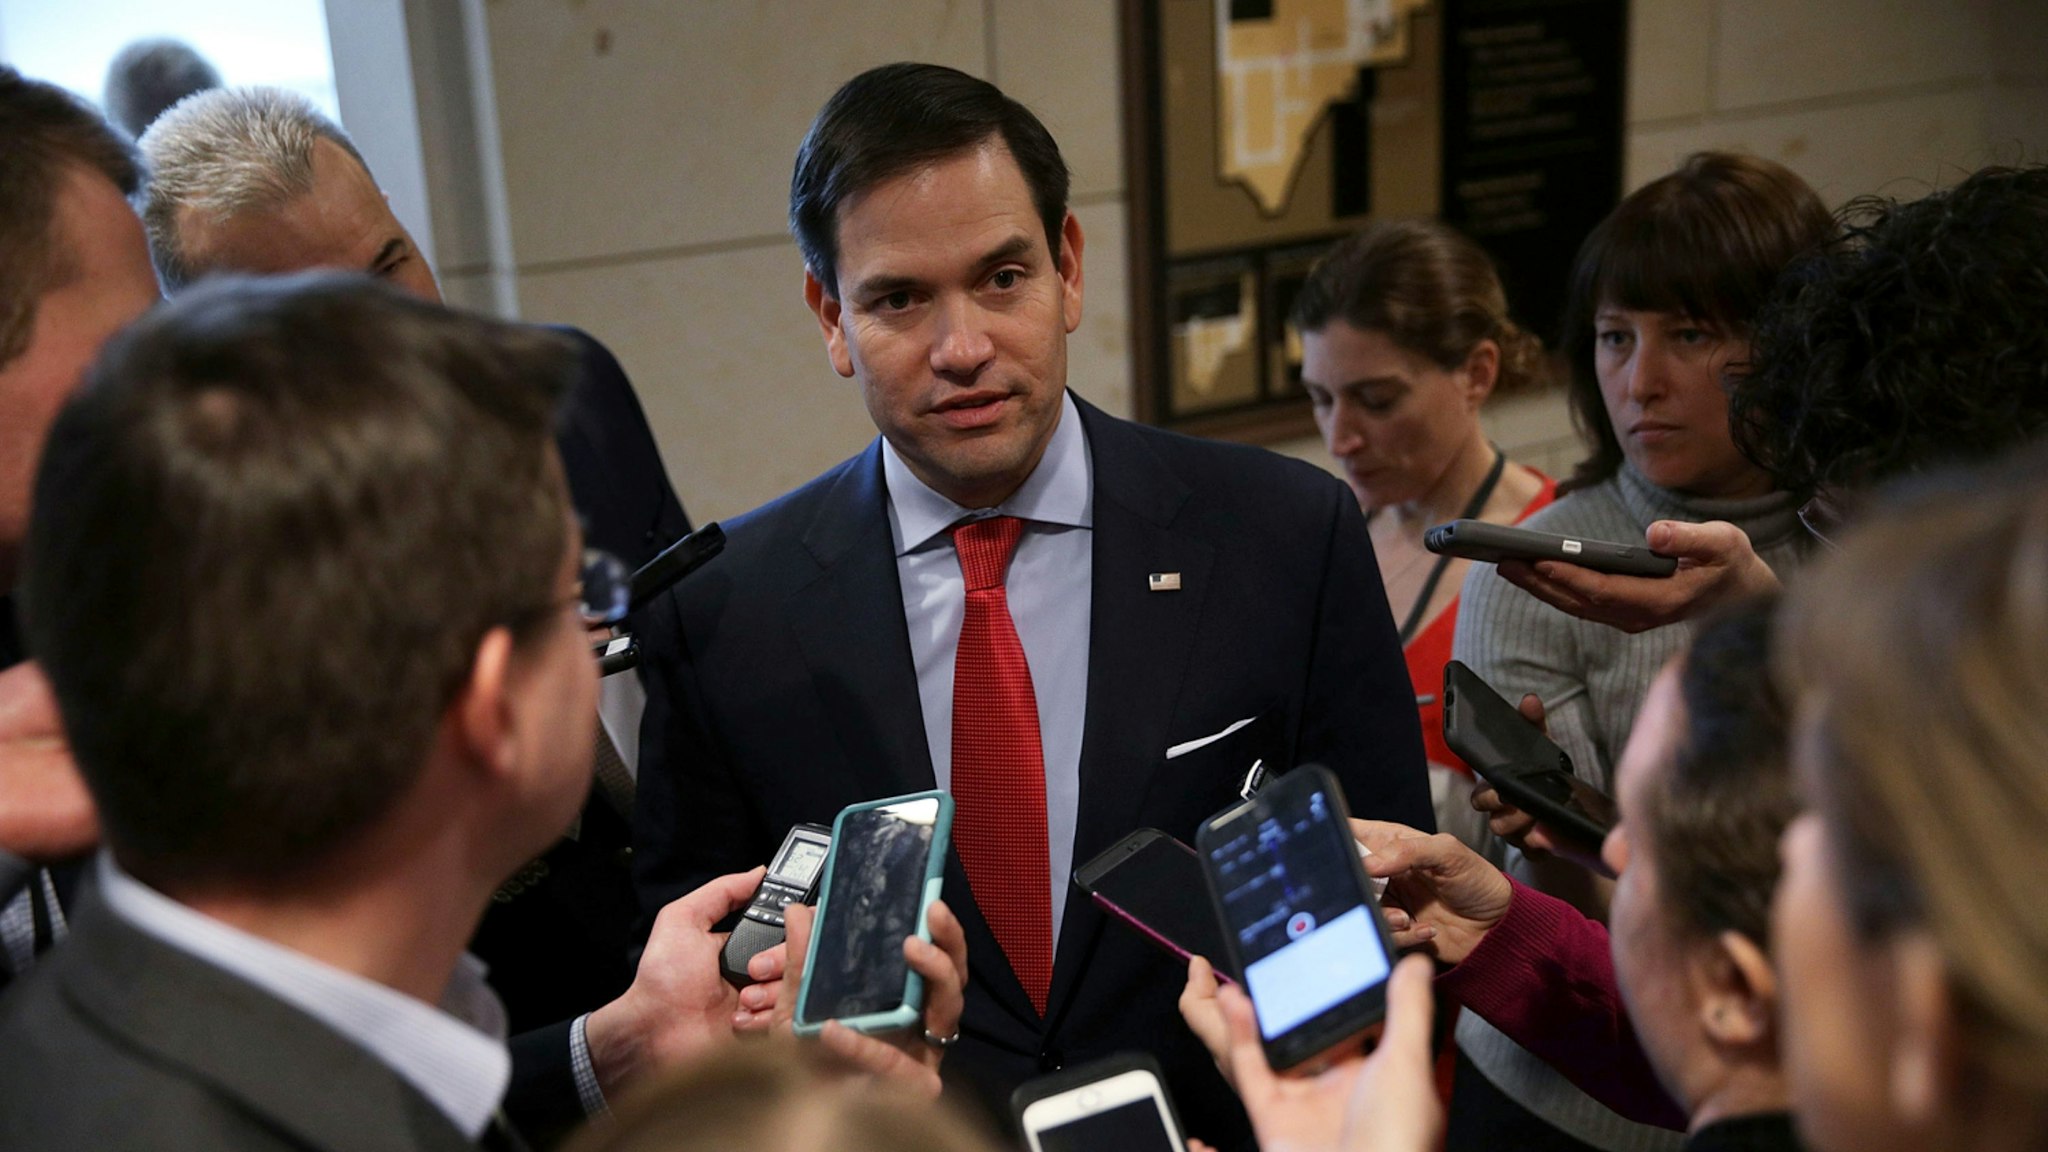 Marco Rubio (R-FL) talks to members of the media as he leaves after a closed briefing on the airstrikes against Syria by Chairman of the Joint Chiefs Gen. Joe Dunford April 7, 2017 at the Capitol in Washington, DC.